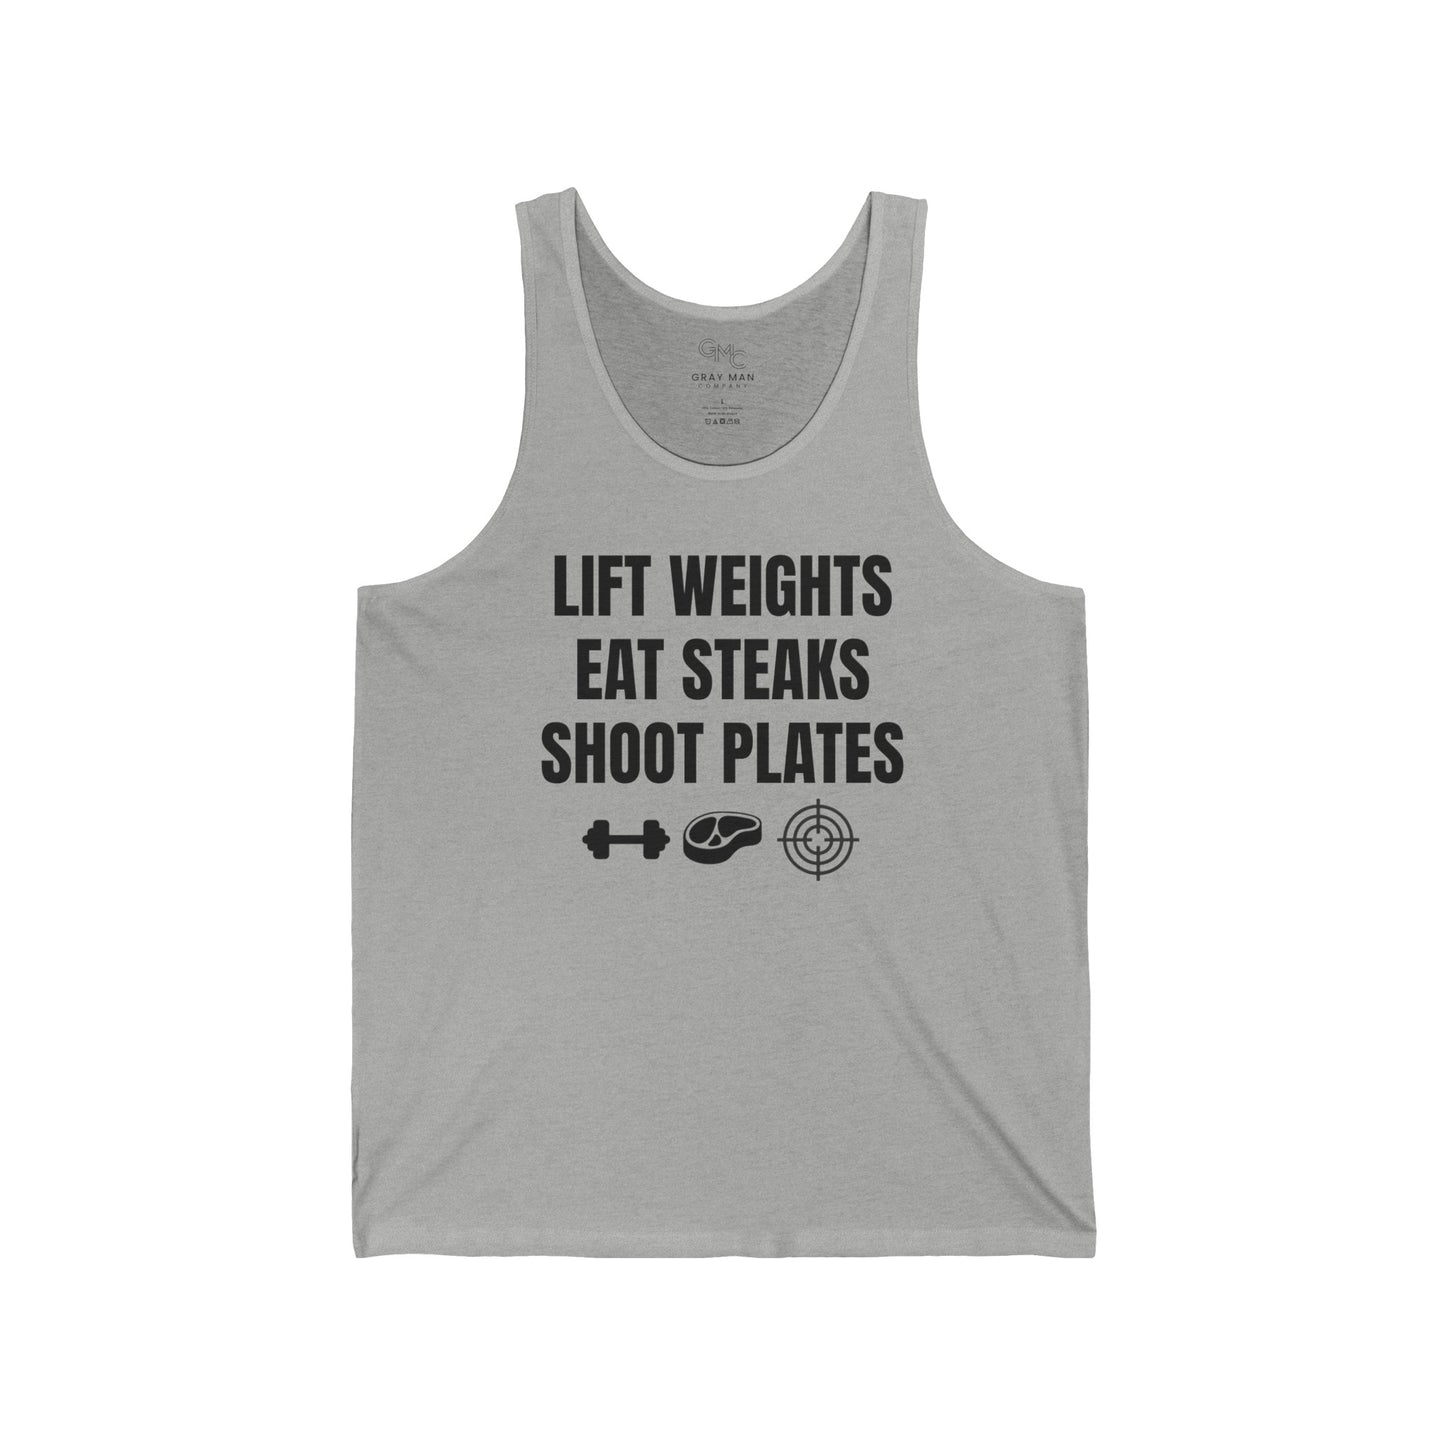 EDC Graphic Tank - LIFT WEIGHTS, EAT STEAKS, SHOOT PLATES